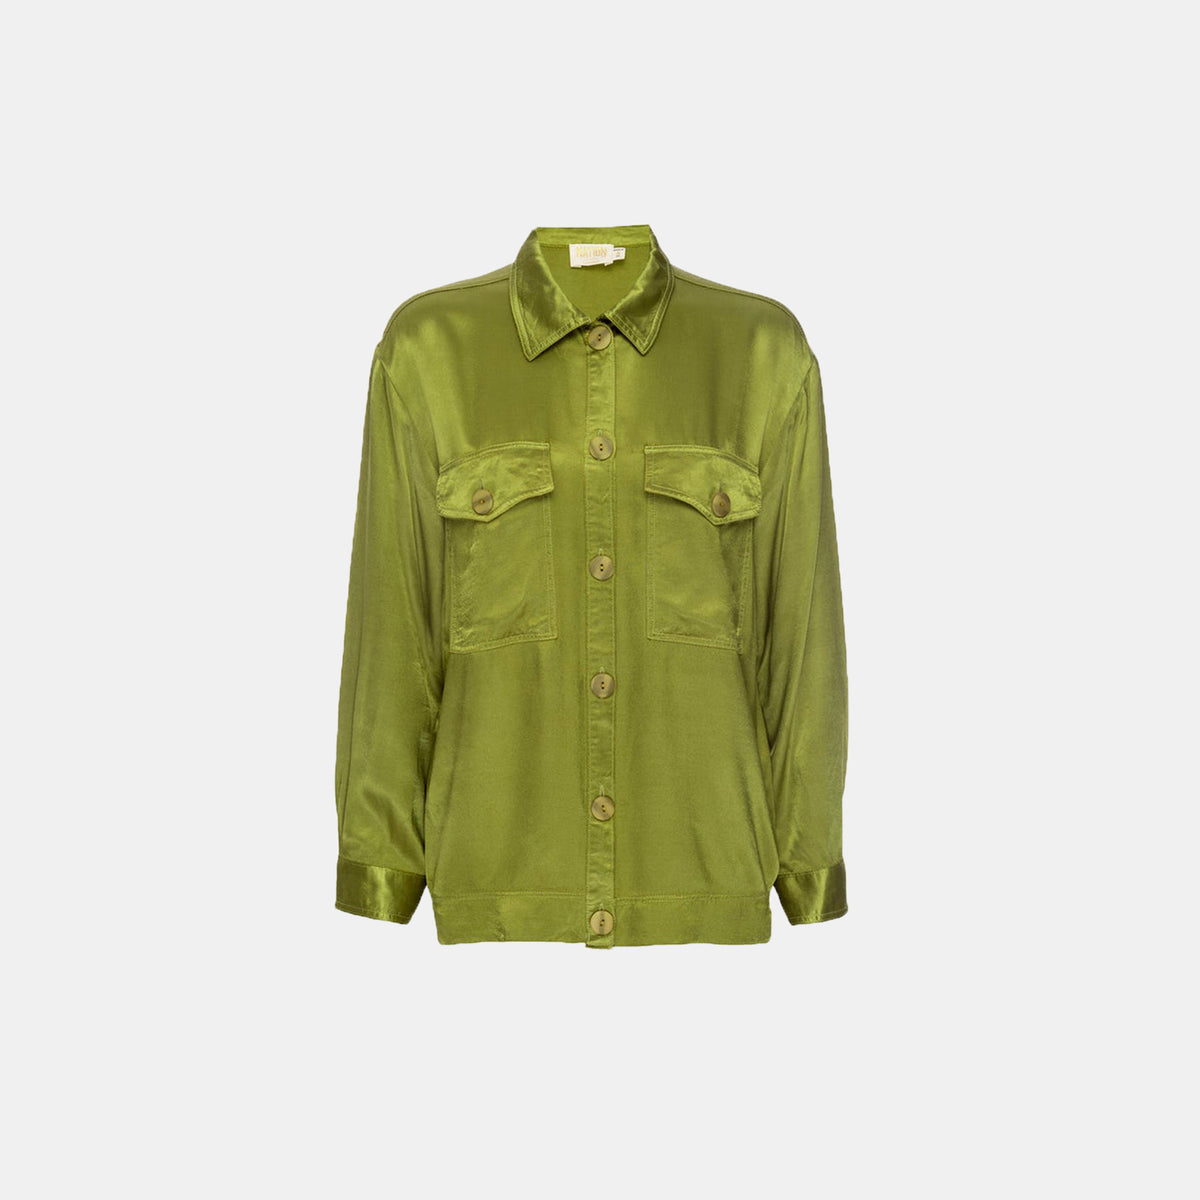 Nation LTD Delaney Button Down Long Sleeve Top in Olive